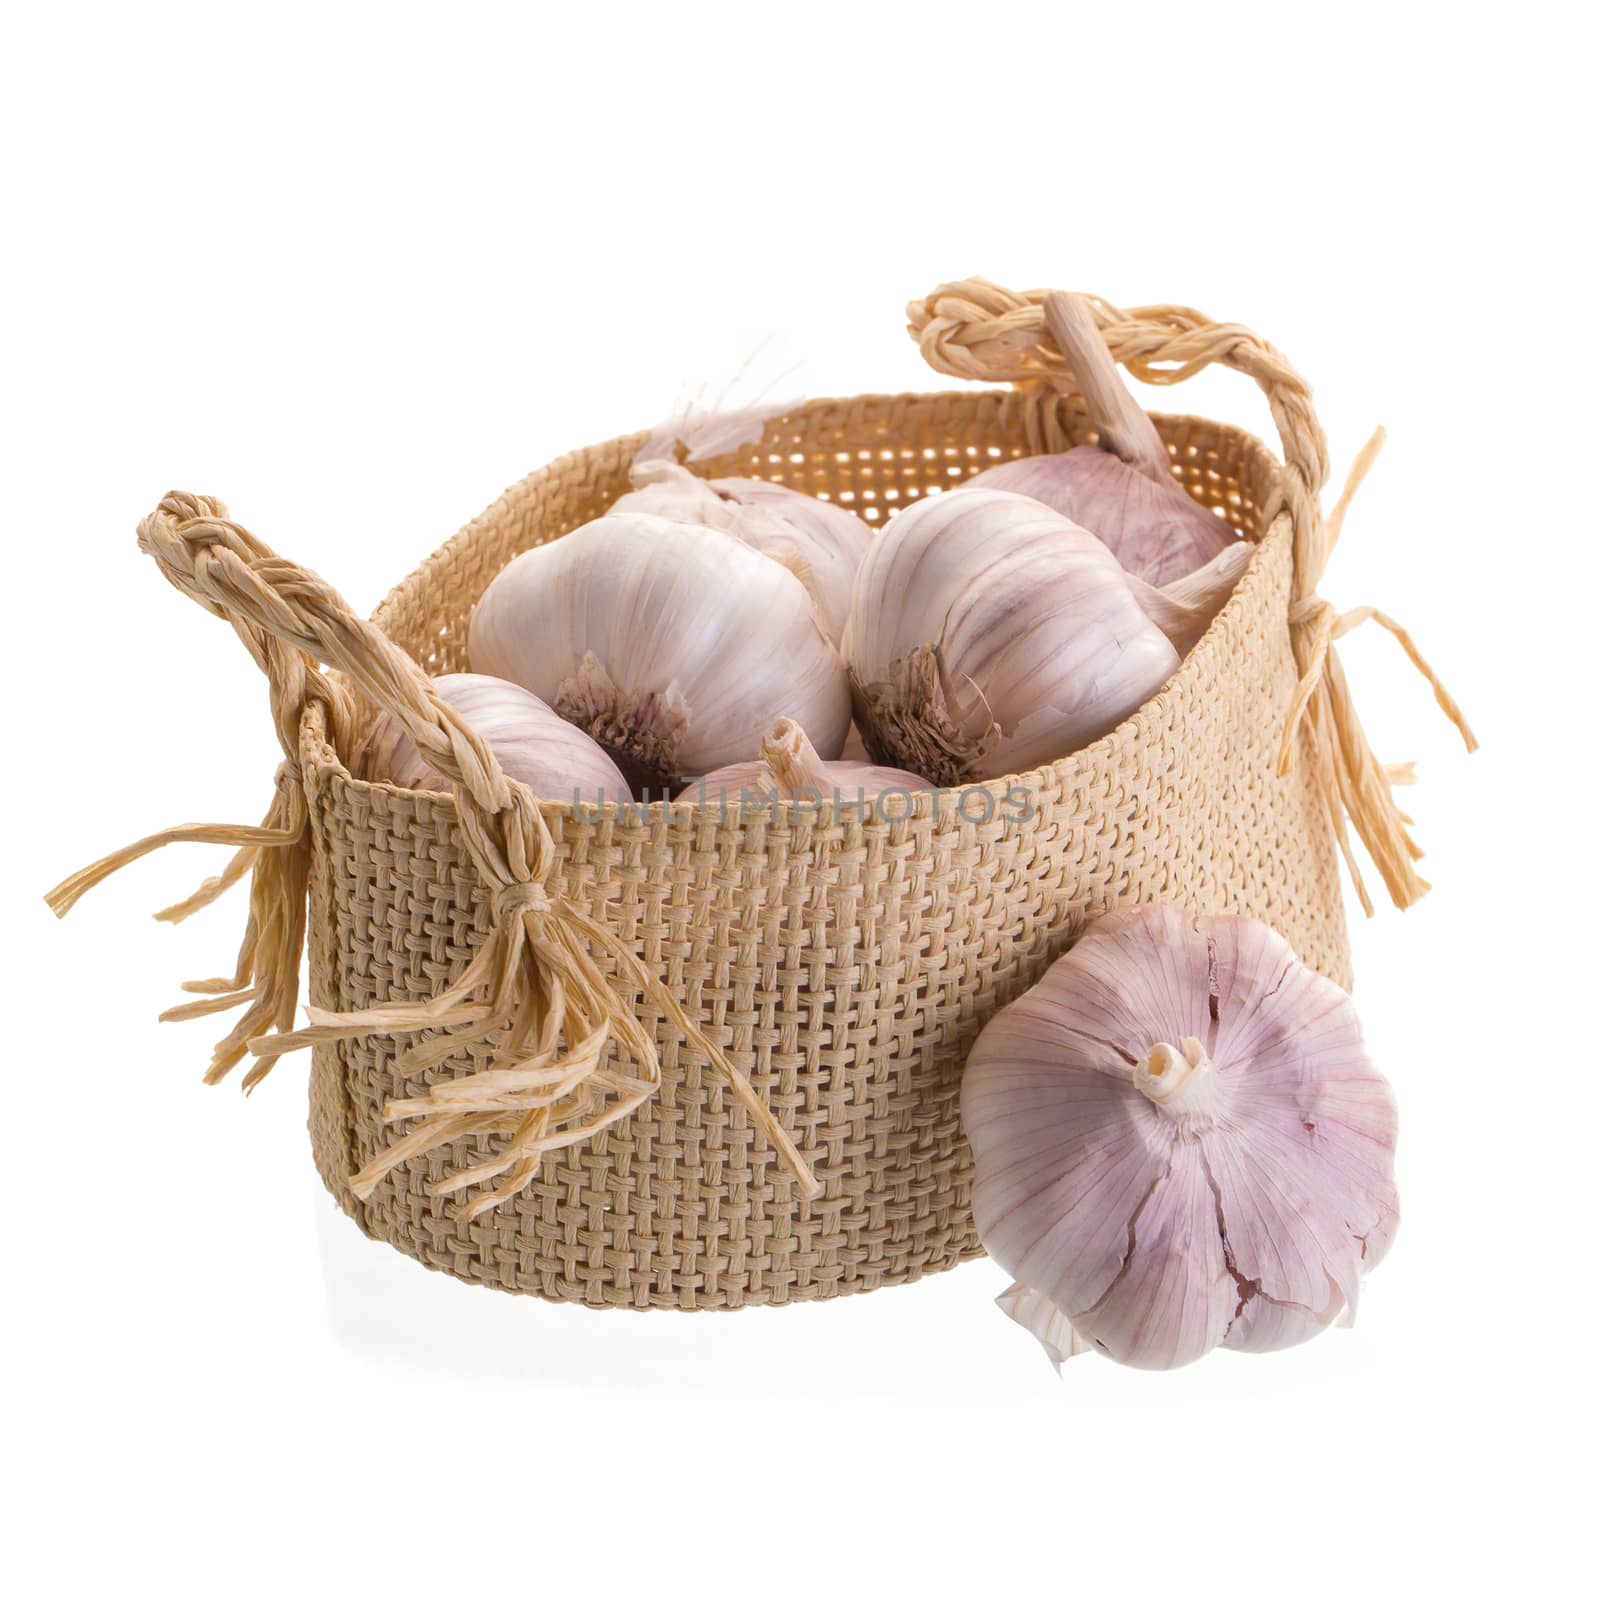 Garlic In the basket isolated on a white background by kaiskynet